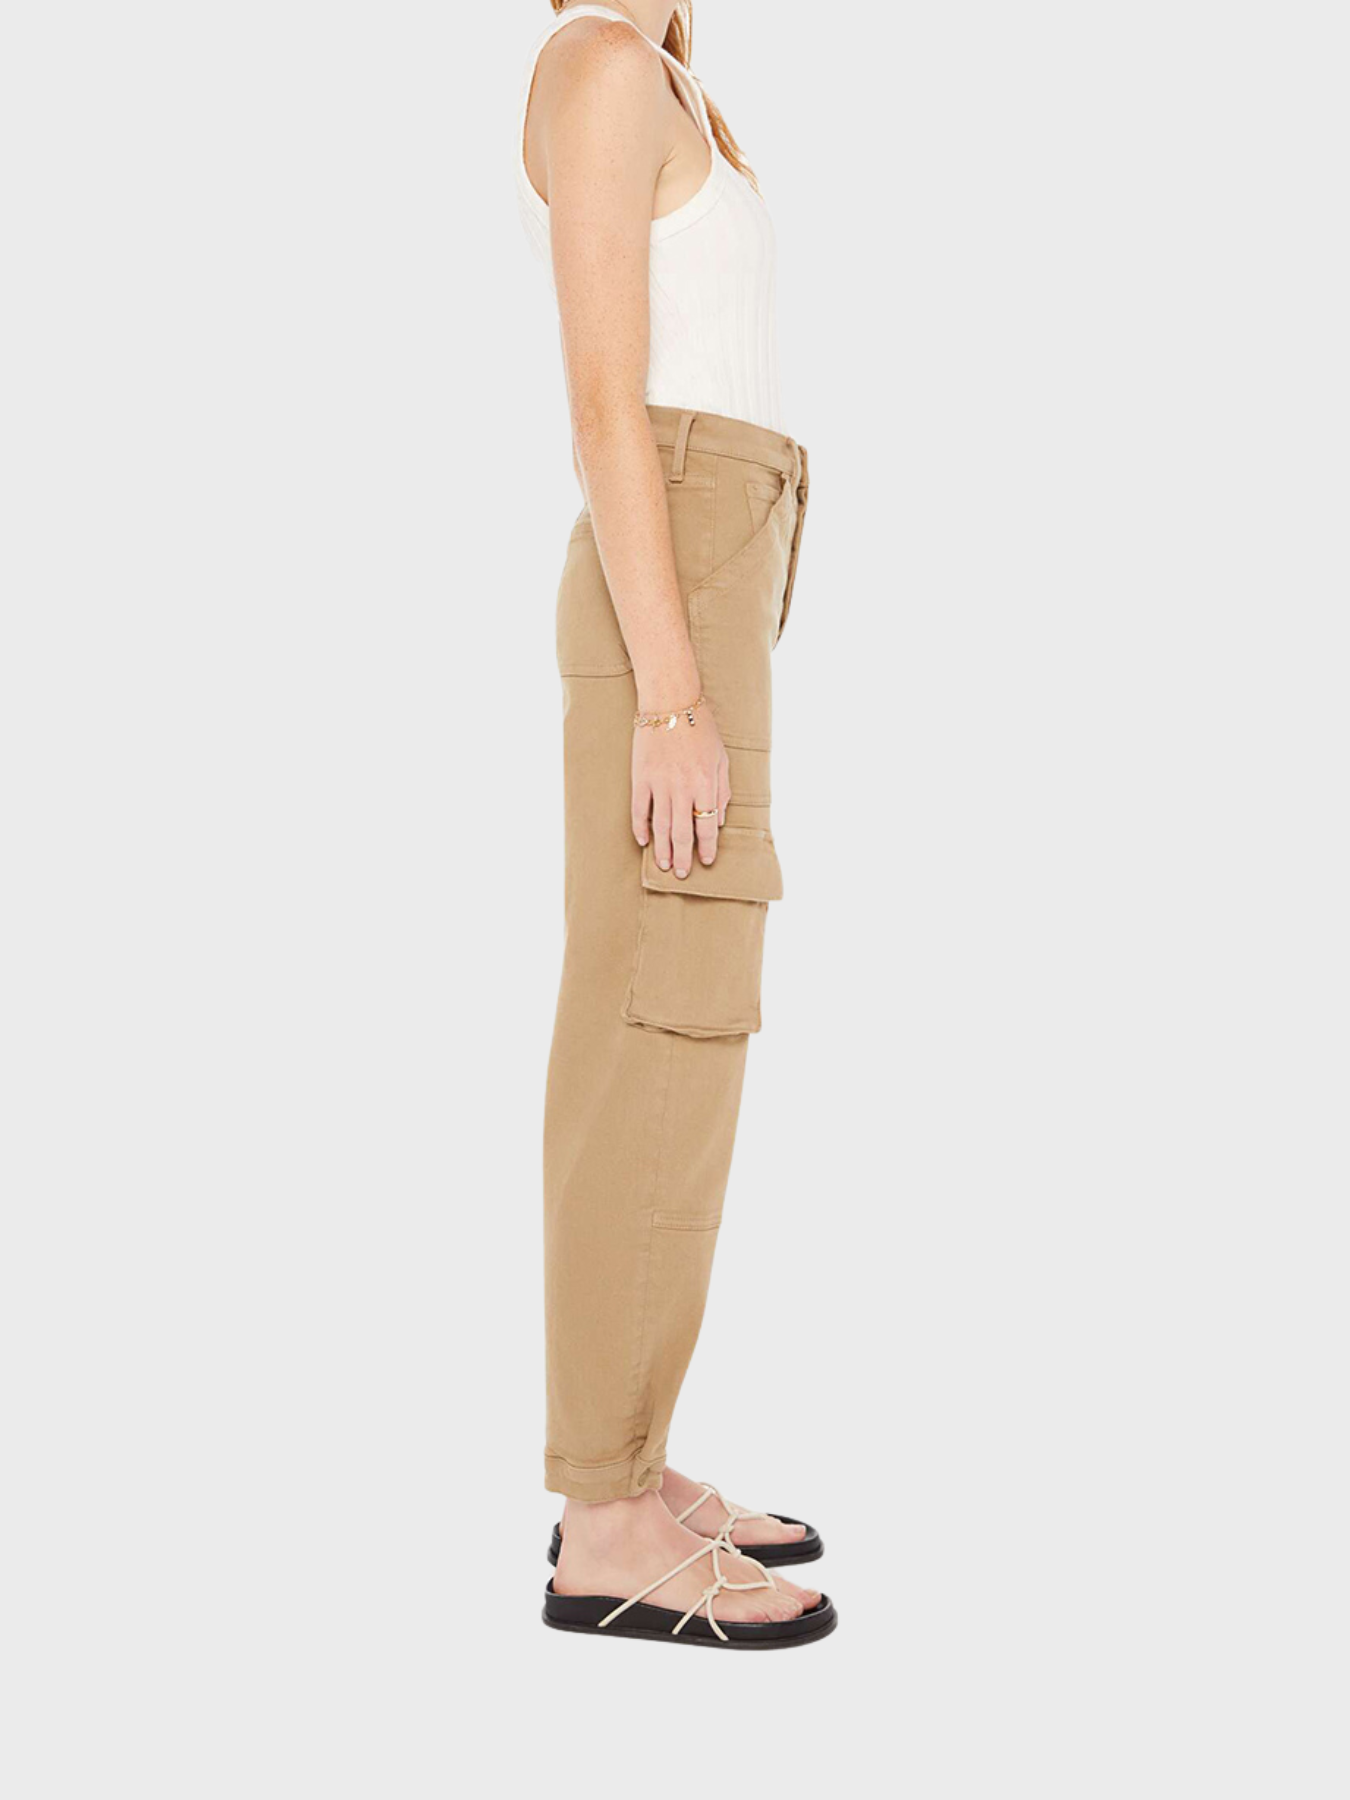 Mother Curbside Cargo Flood Pants Prairie Sand-Pants-West of Woodward Boutique-Vancouver-Canada